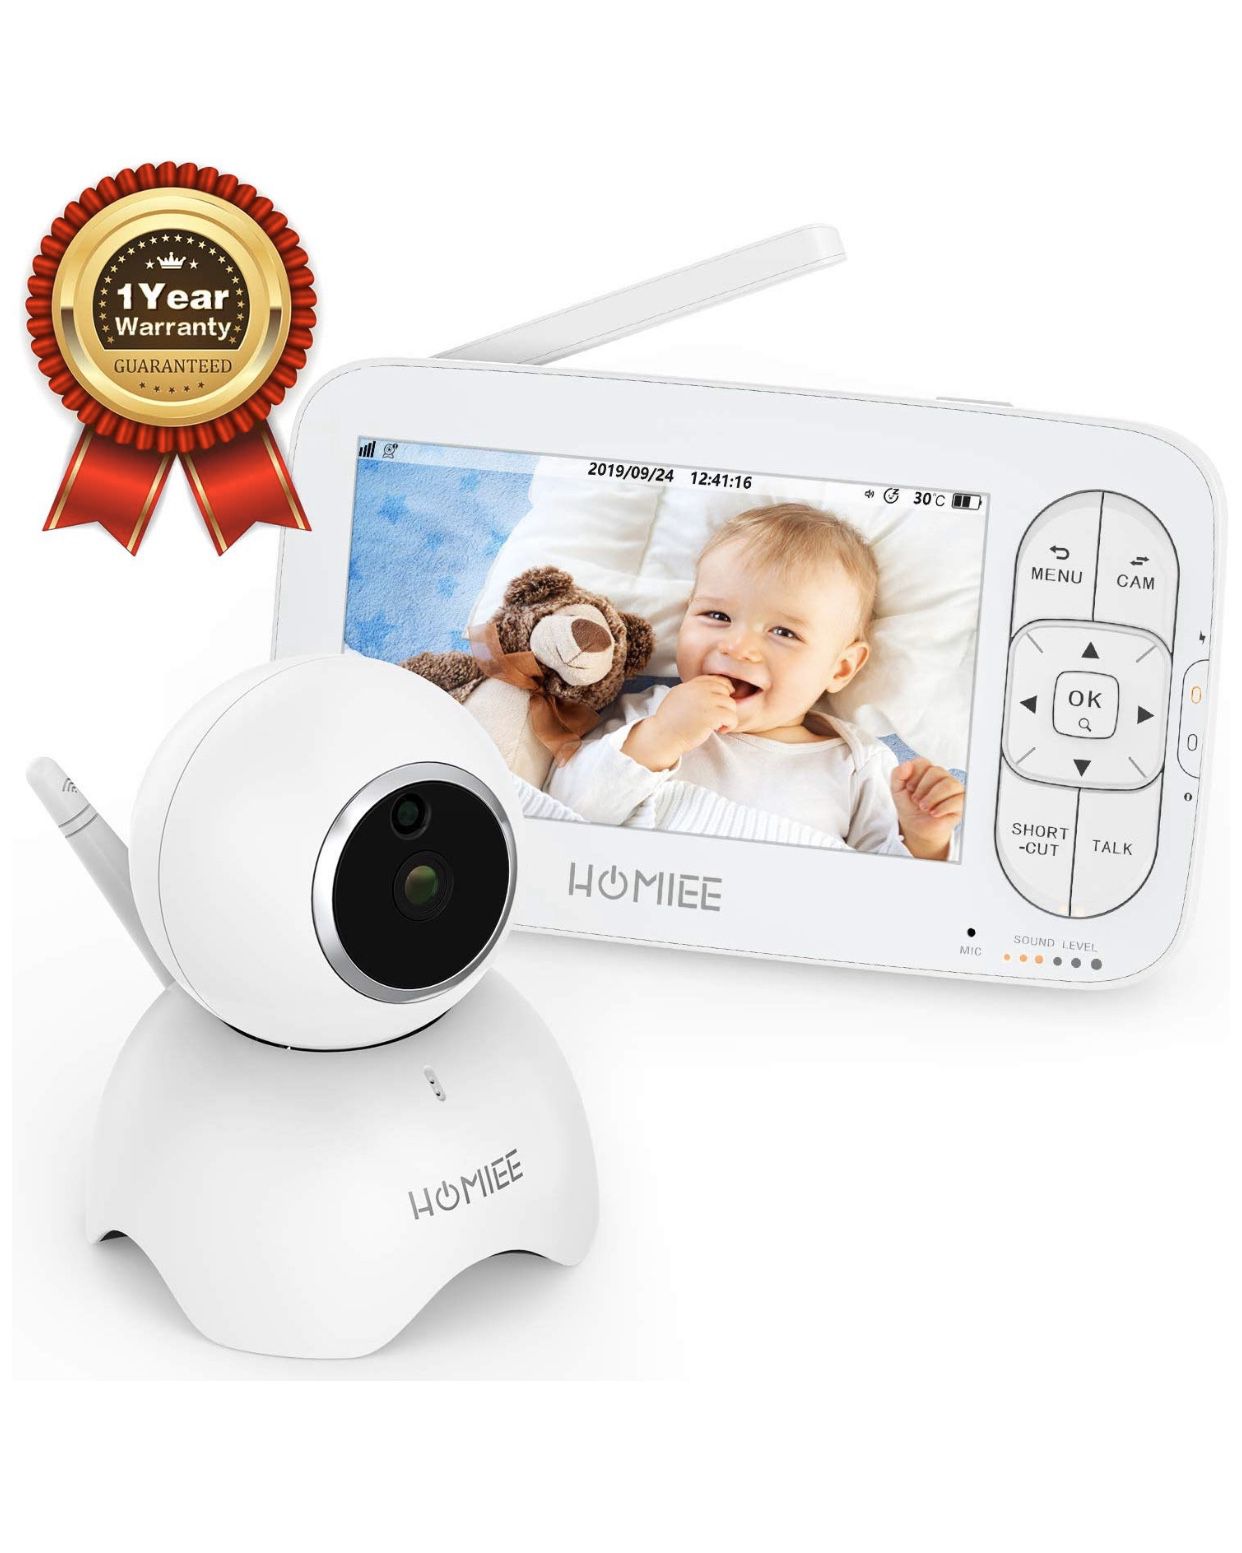 BRAND NEW baby monitor with 5” LCD screen 1000ft range various features